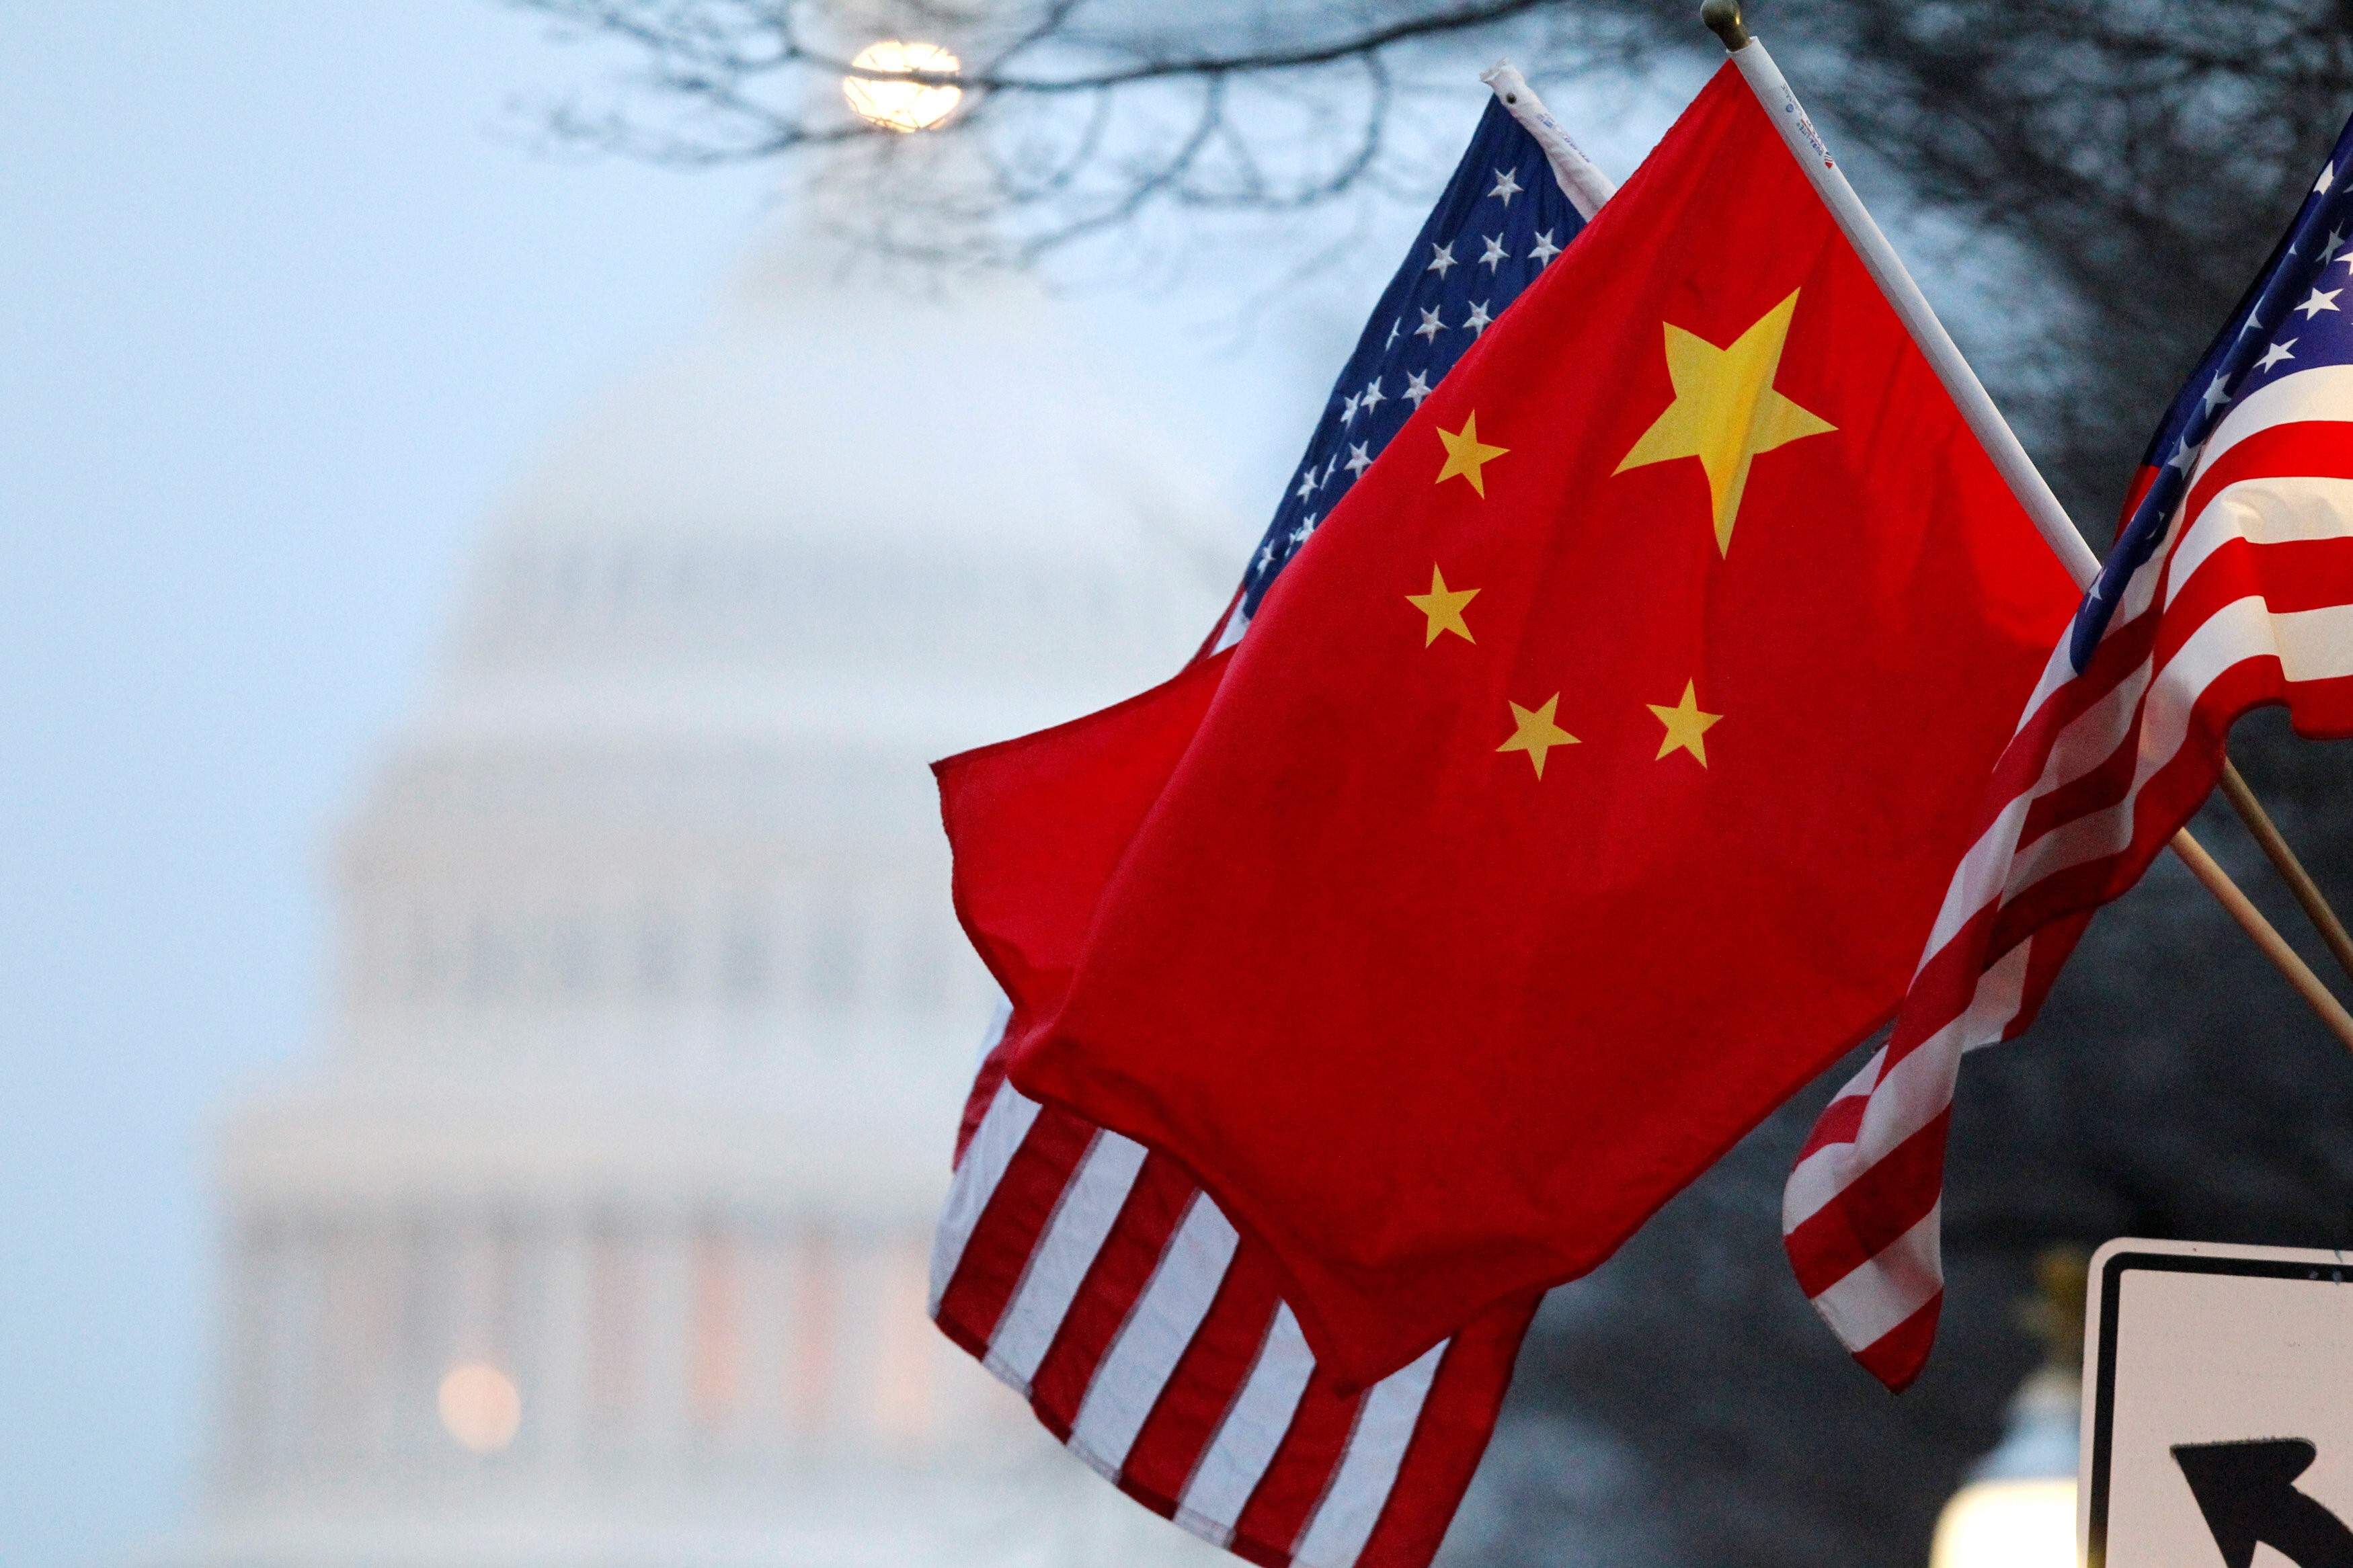 US public opinion of China hits new low, Pew survey shows | South China Morning Post